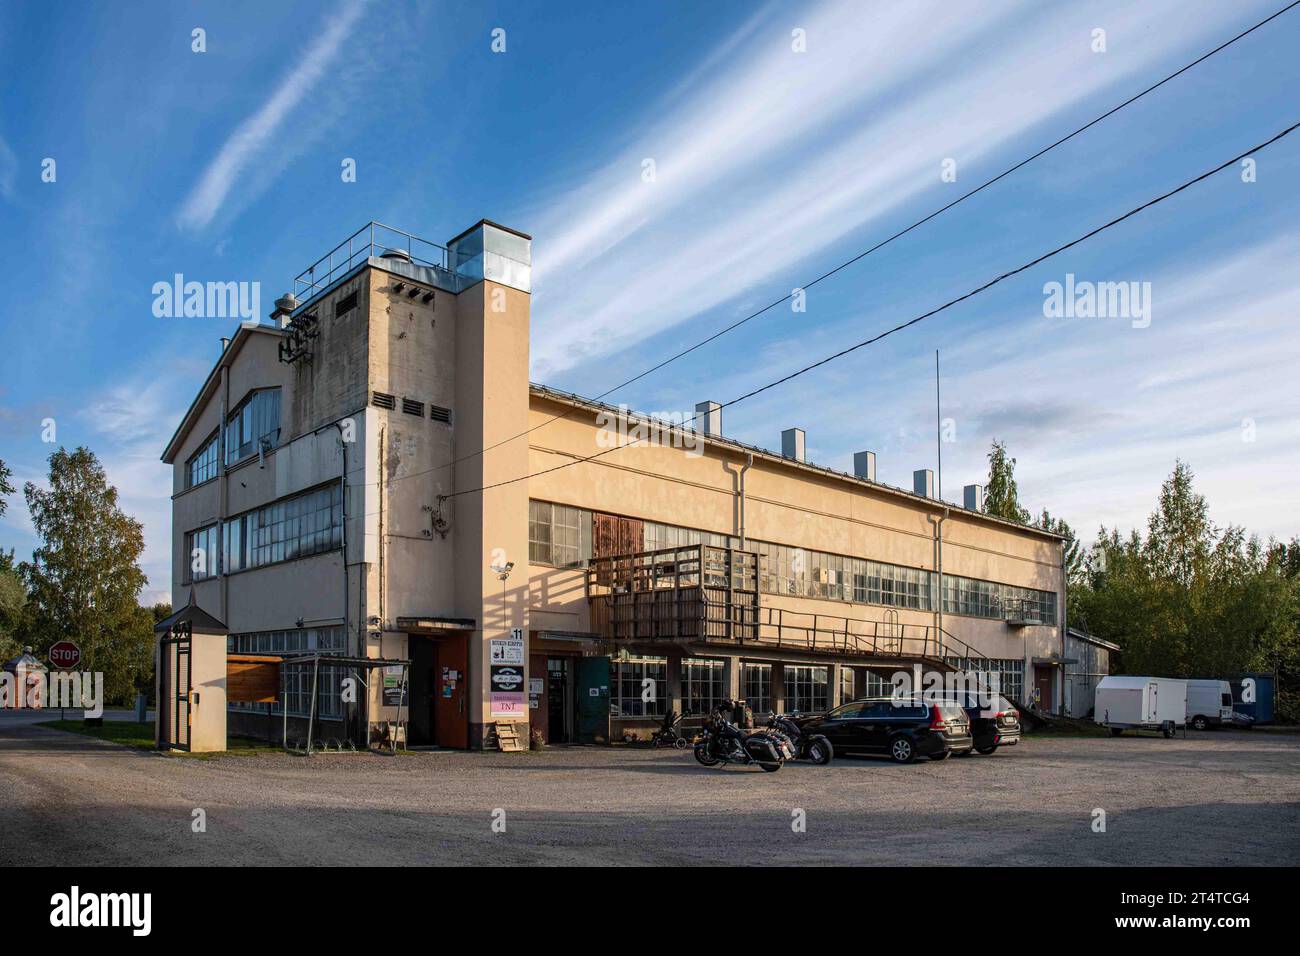 Former industrial building of Kellokosken Ruukki, now a second-hand store, in the evening sunshine in Kellokoski district of Tuusula, Finland Stock Photo